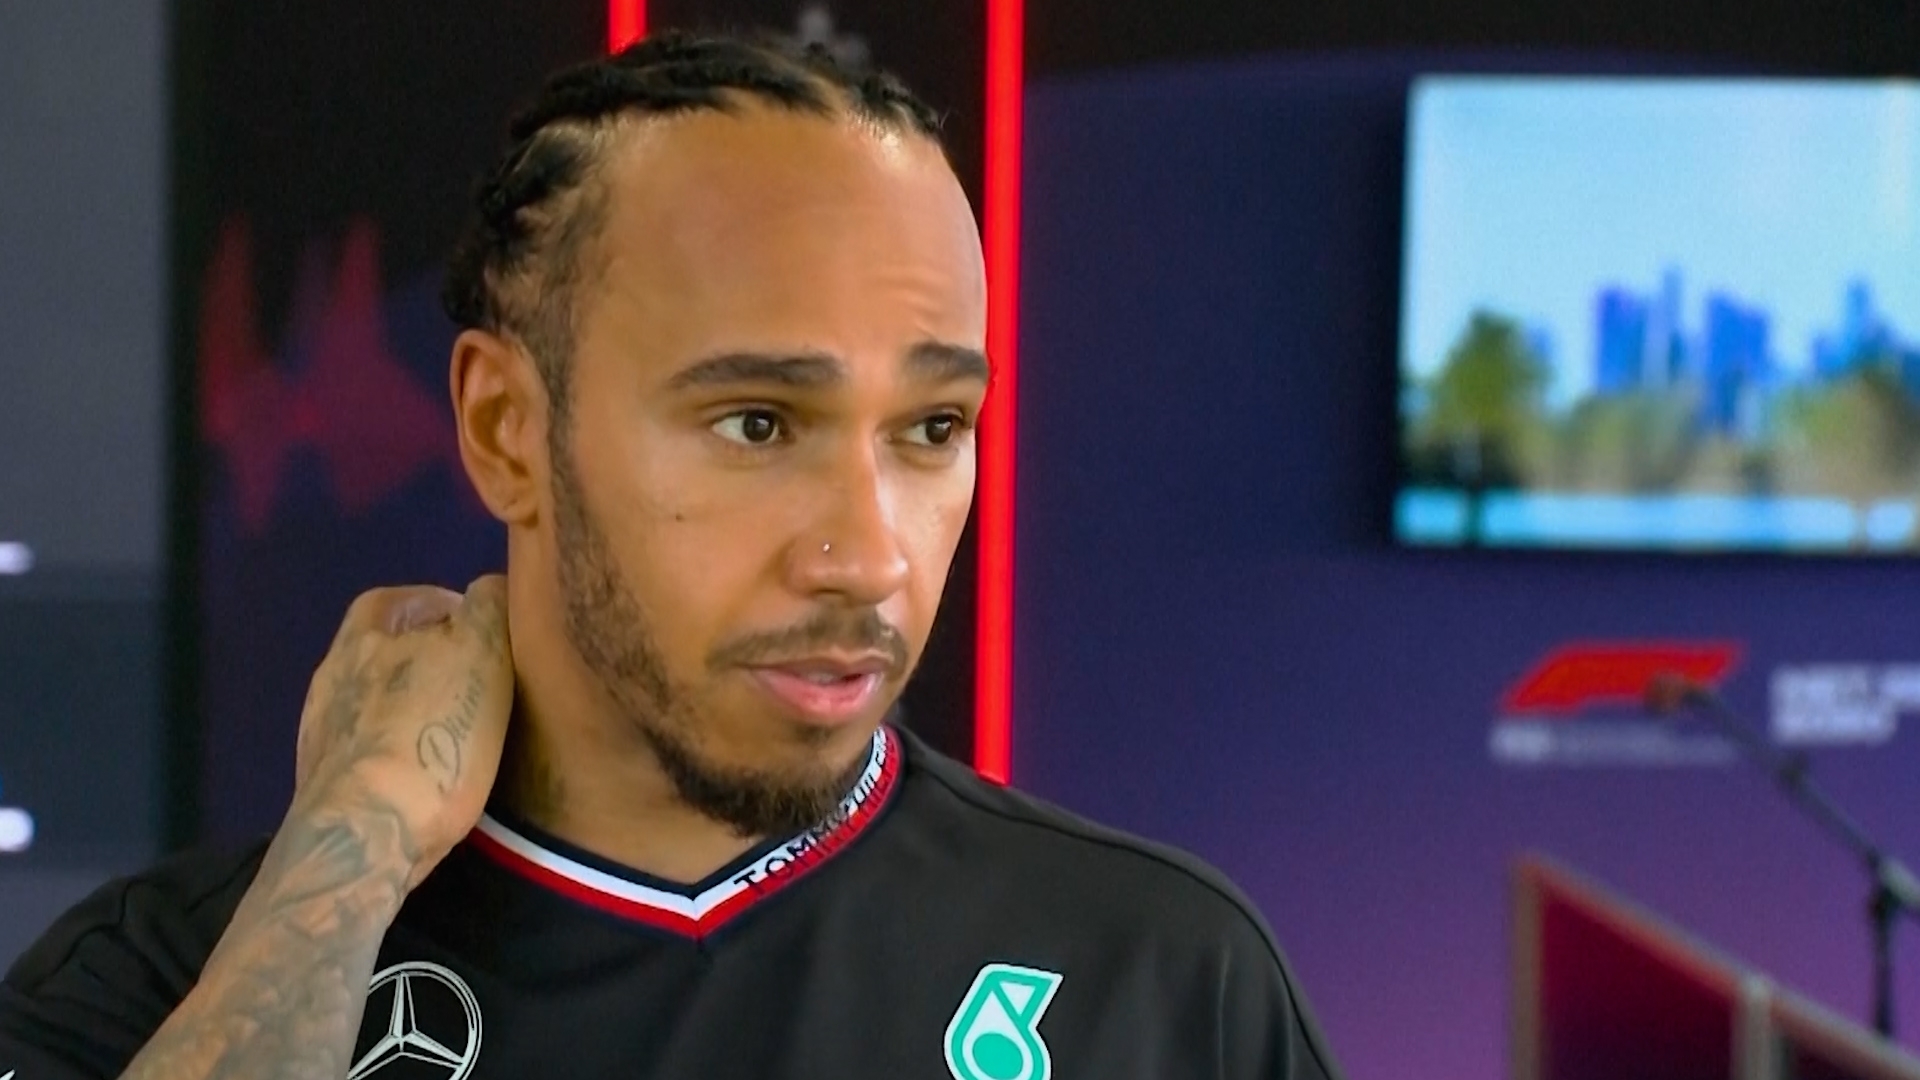 Hamilton: One of the worst sessions I've had